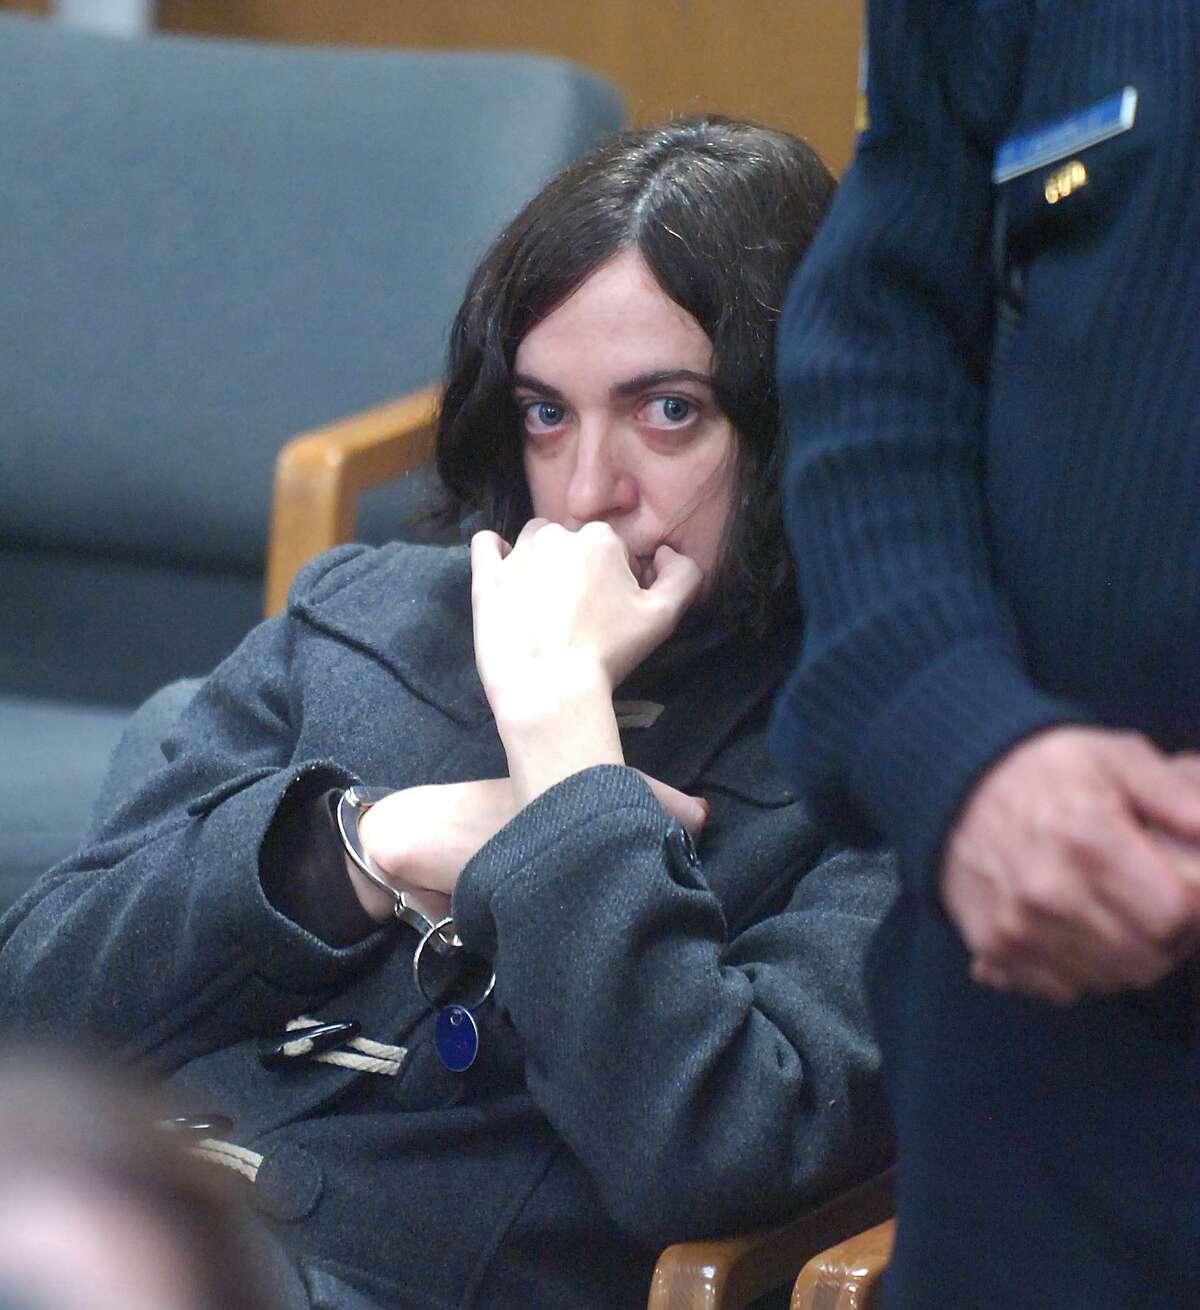 Stacy Lore is arraigned in Norwalk Superior Court on May 5, 2010 in Norwalk Conn